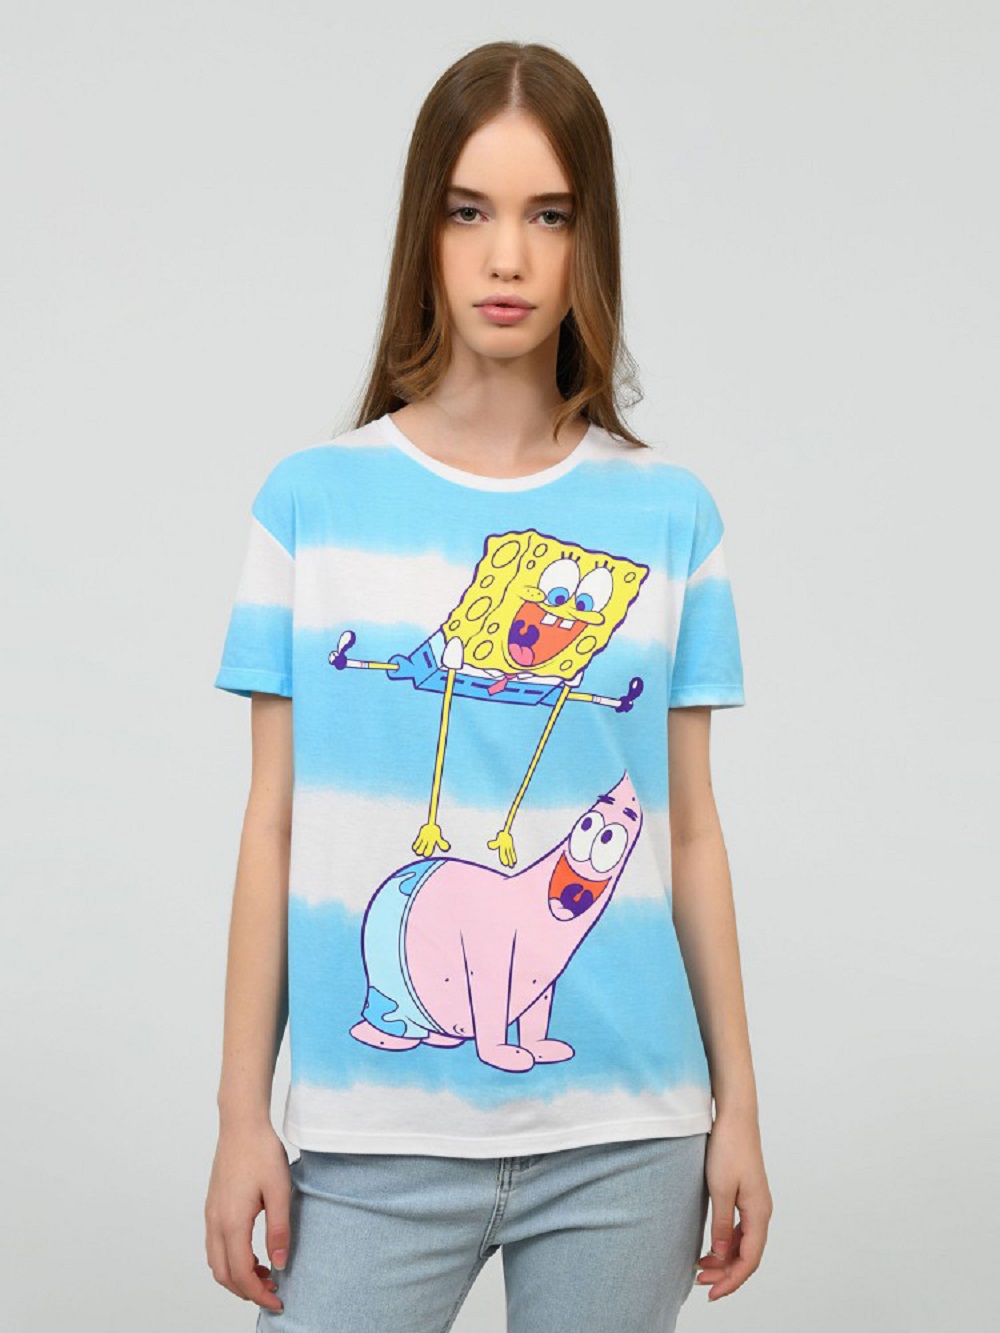 Gangster Spongebob Have Fun With Friends Full Size Up To 5xl